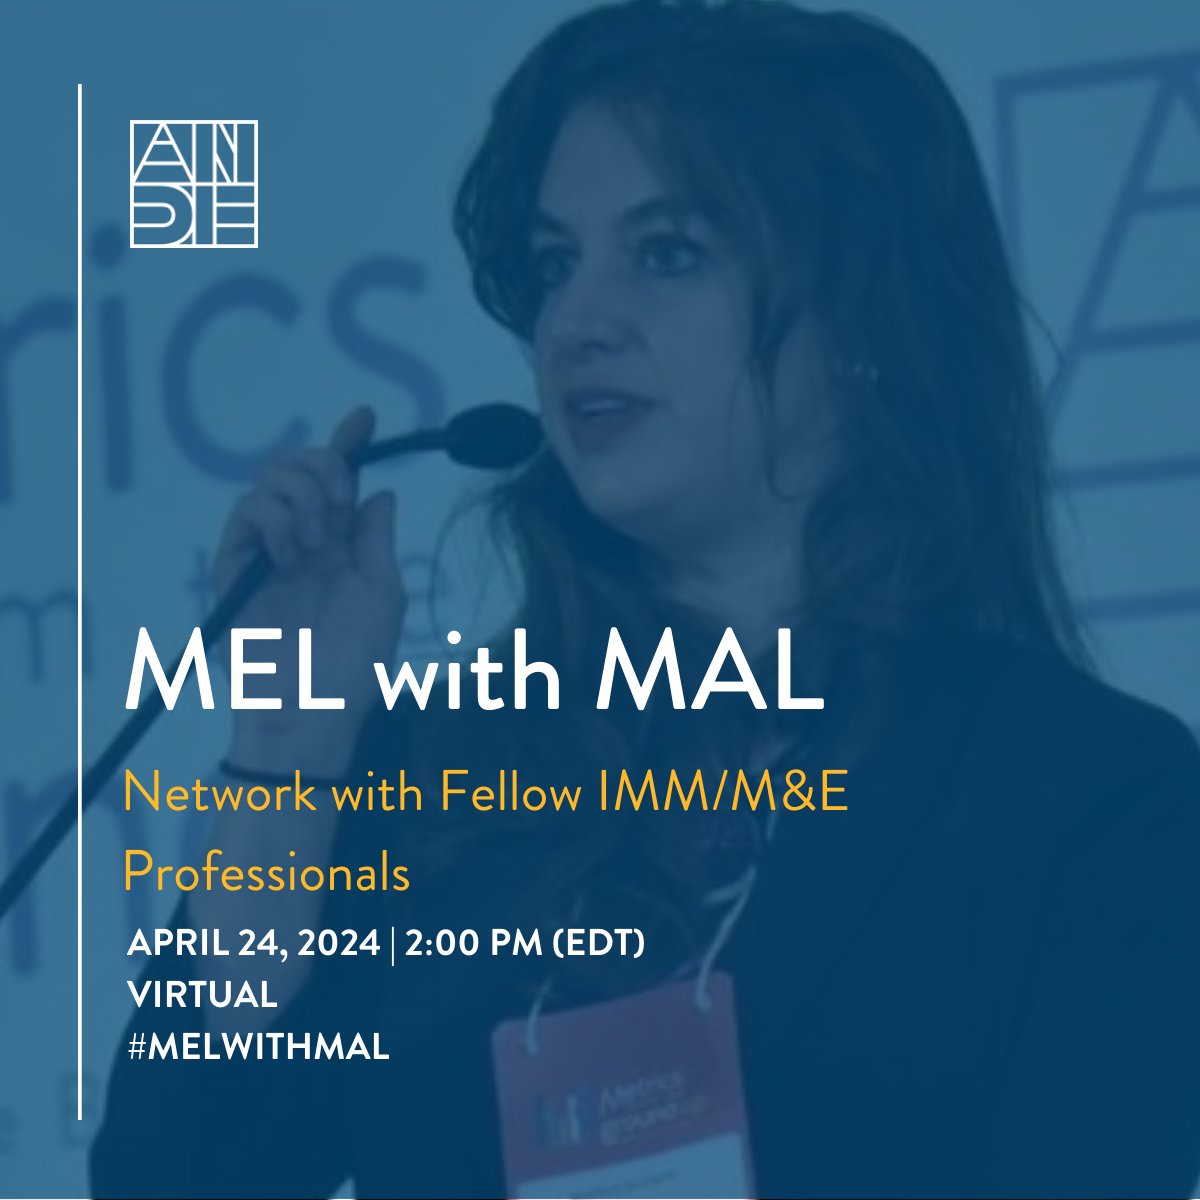 Professionals in Impact Measurement & Management (IMM)! Seeking a supportive community? 'MEL with Mal' convenes on April 24th at 2PM (EDT). Share best practices, ask questions, & network with peers. 🔗 Register here: aspeninstitute.zoom.us/meeting/regist… #ANDE #MELWITHMAL #IMM